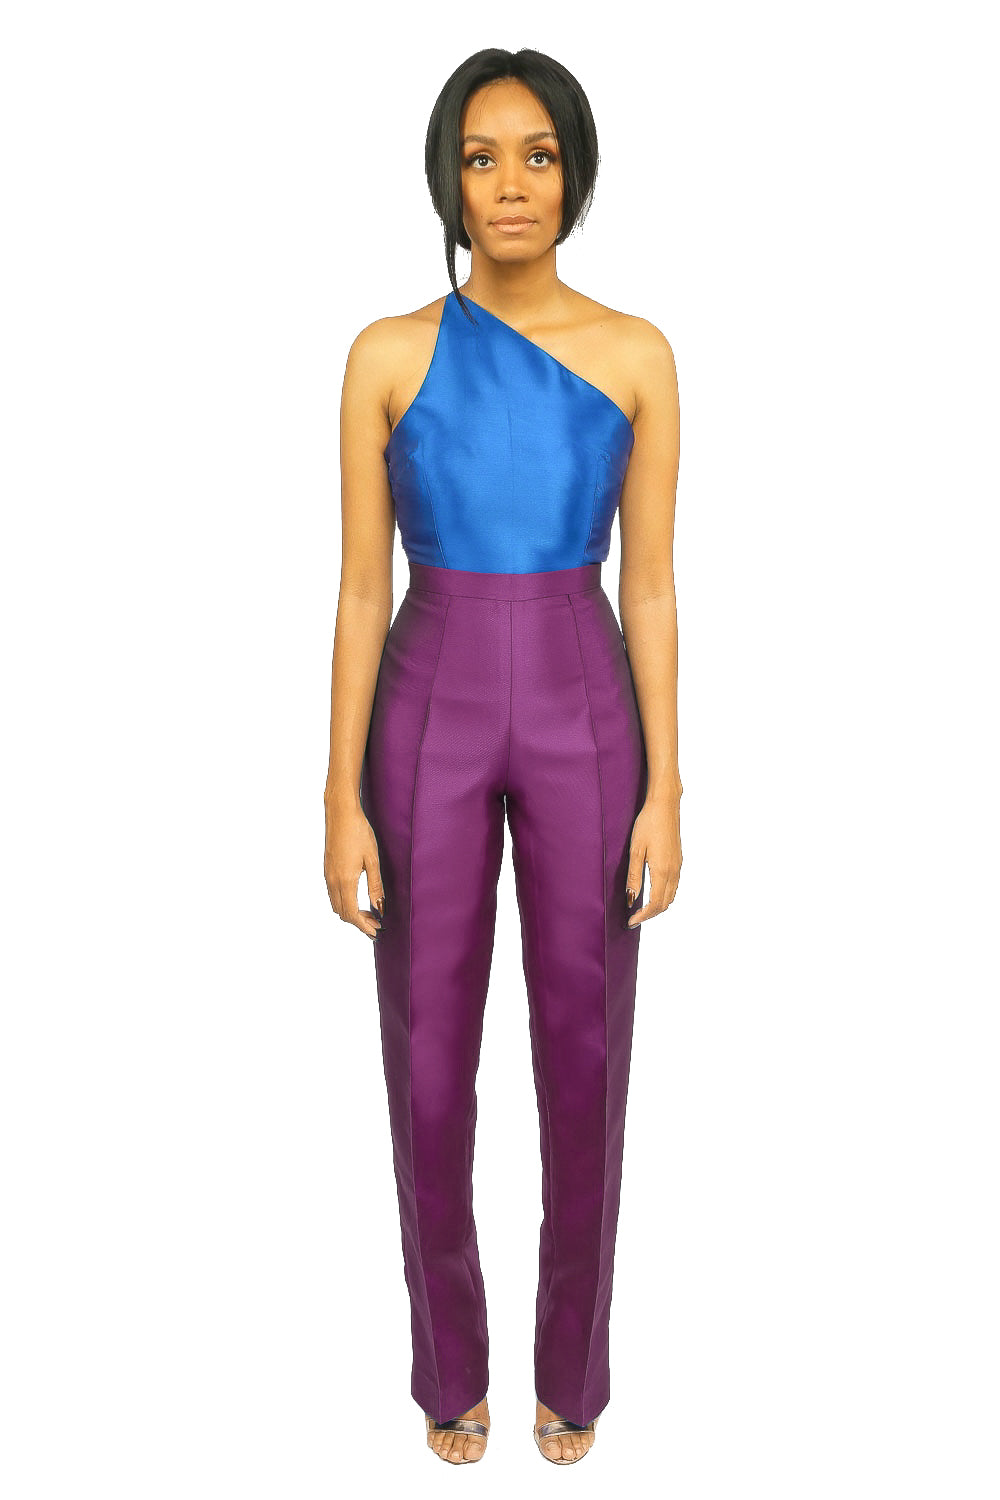 A model wearing a one-shoulder Blue Top and a purple high waist straight cut pant